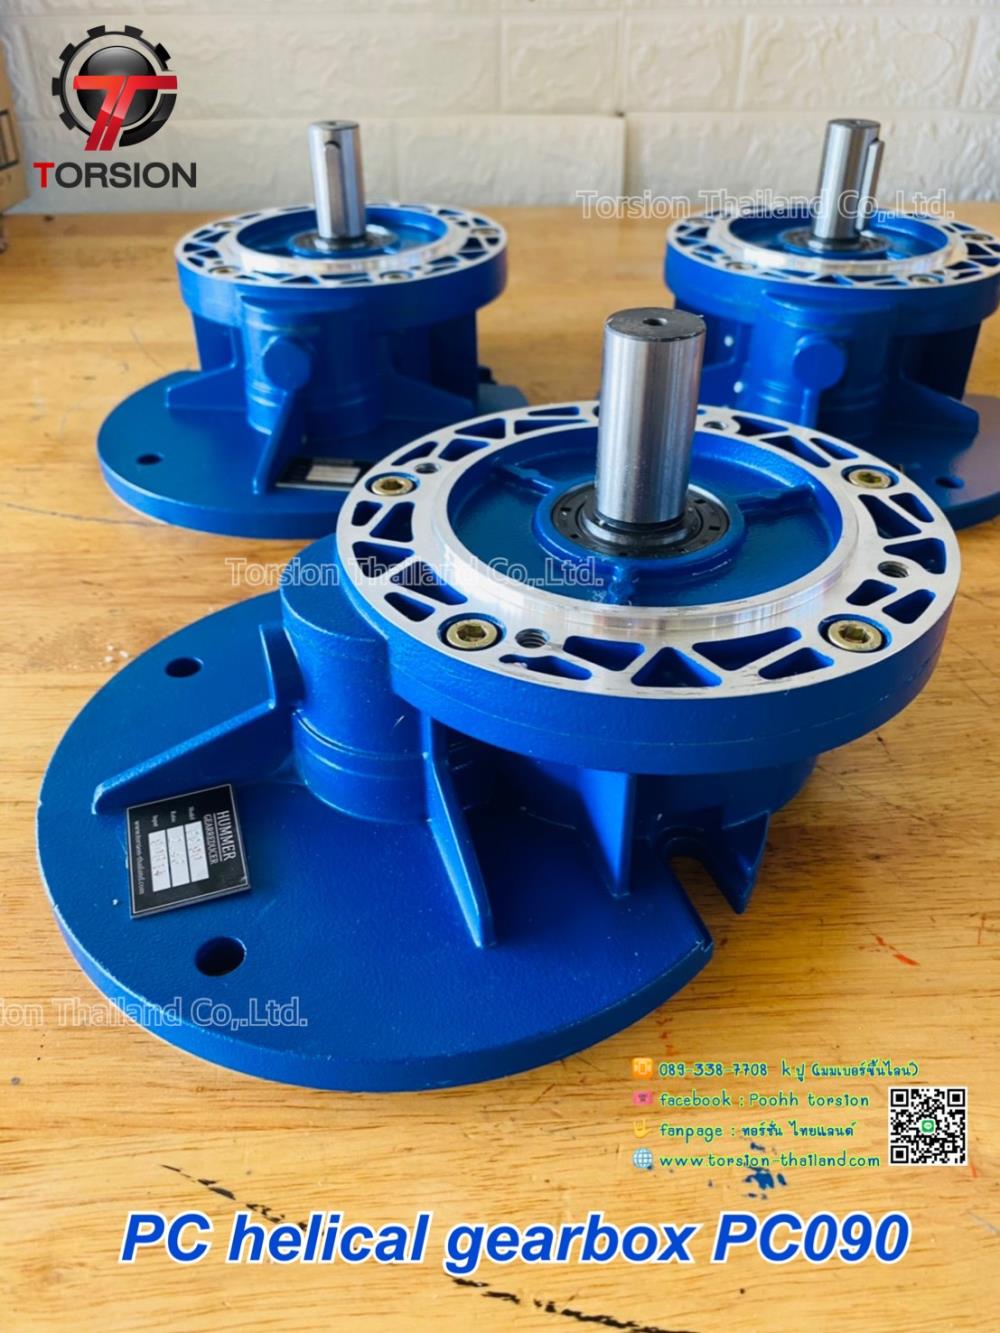 PC helical gearbox PC090,PC helical gearbox PC090 , PC helical gearbox , PC helical , Pre-stage helical unit , hummer , Pre-stage , Pre-stage helical,HUMMER,Machinery and Process Equipment/Gears/Gearboxes